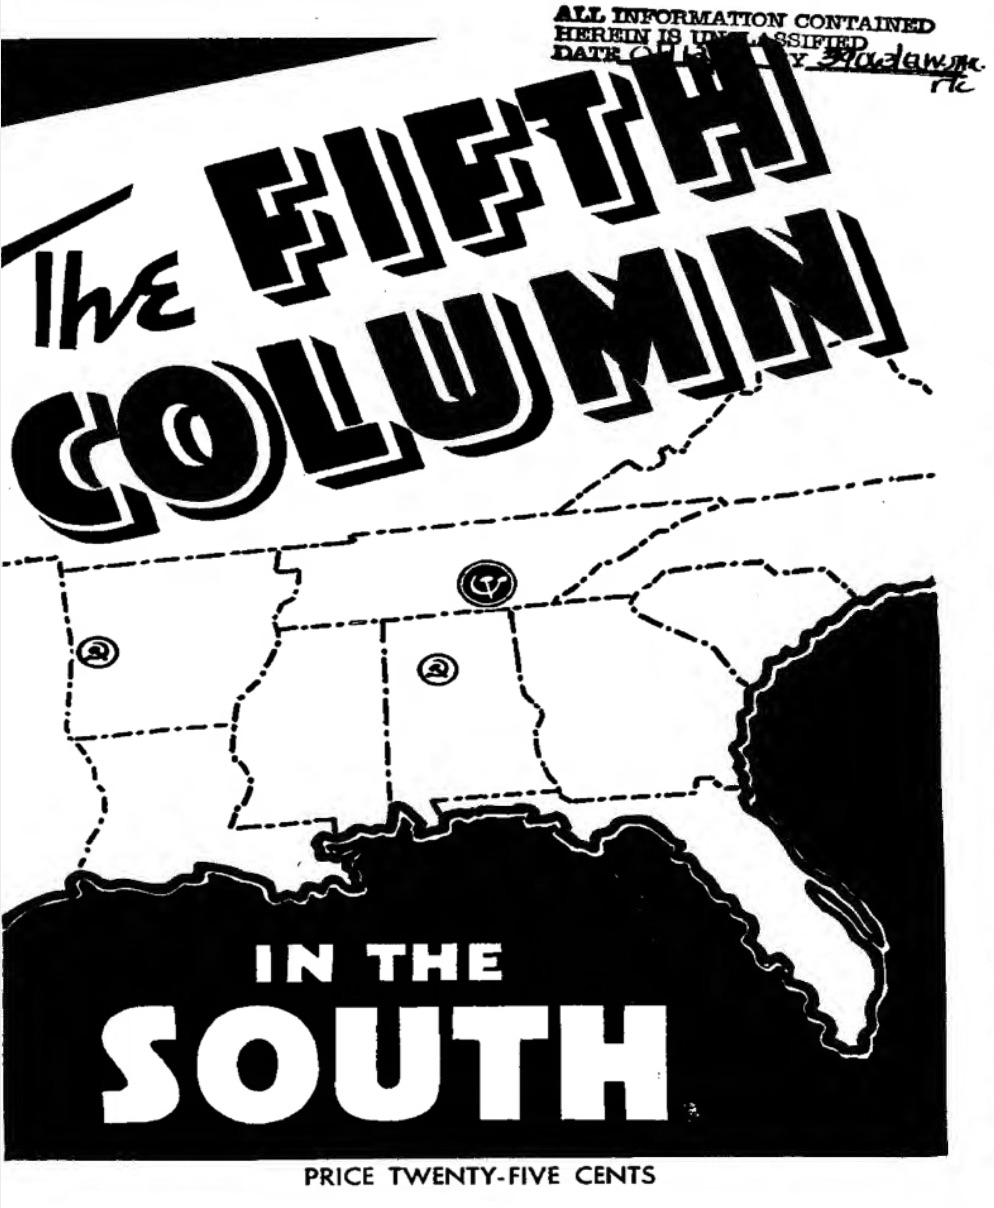 The Fifth Column in the South (1940) by Joseph Peter Kamp